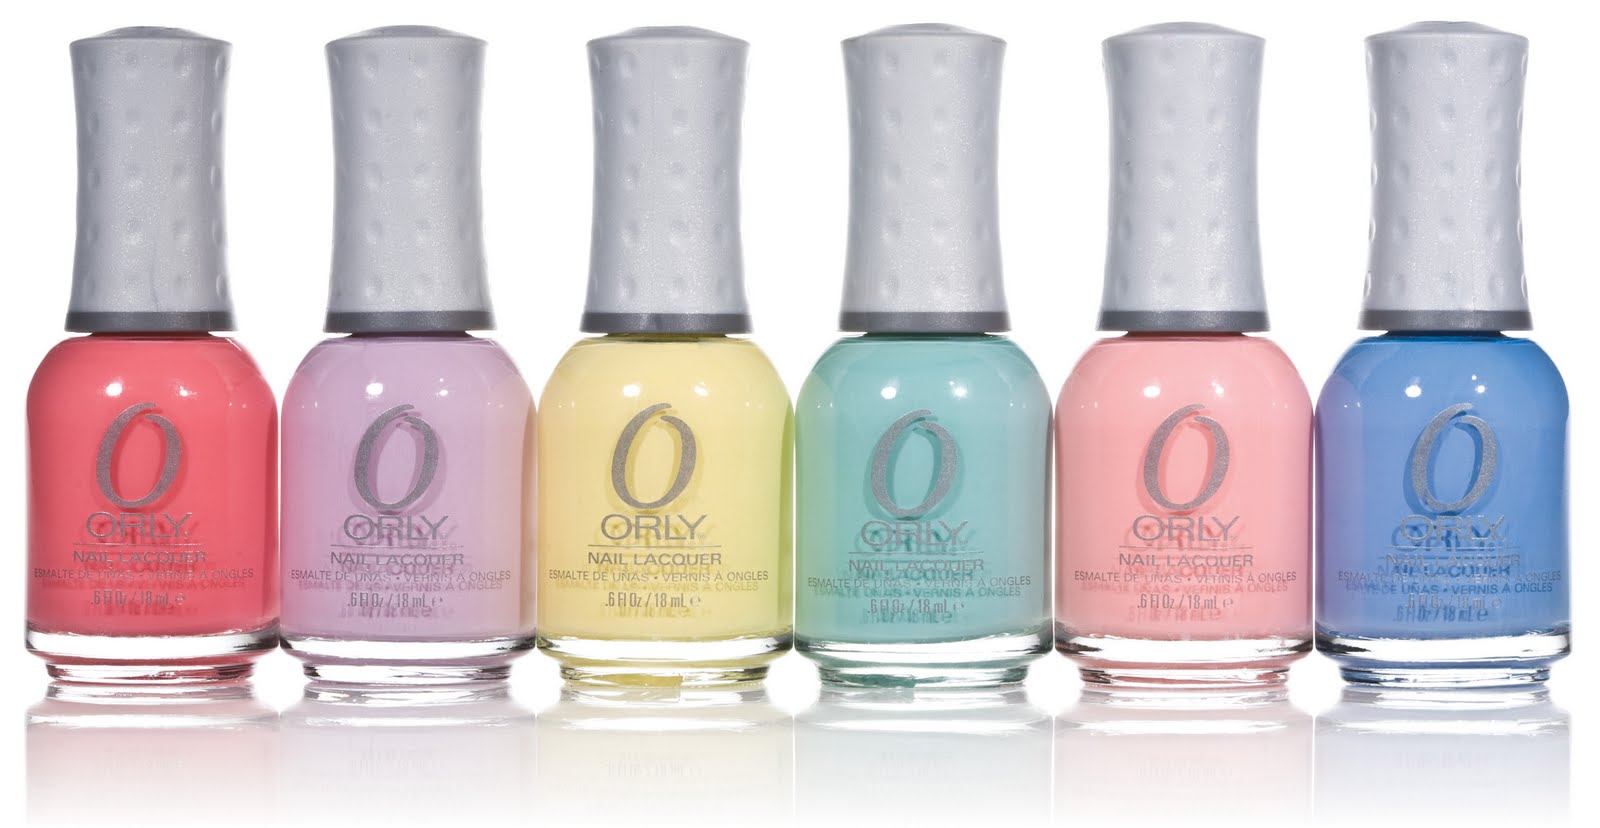 7. Orly "Cotton Candy" - wide 4